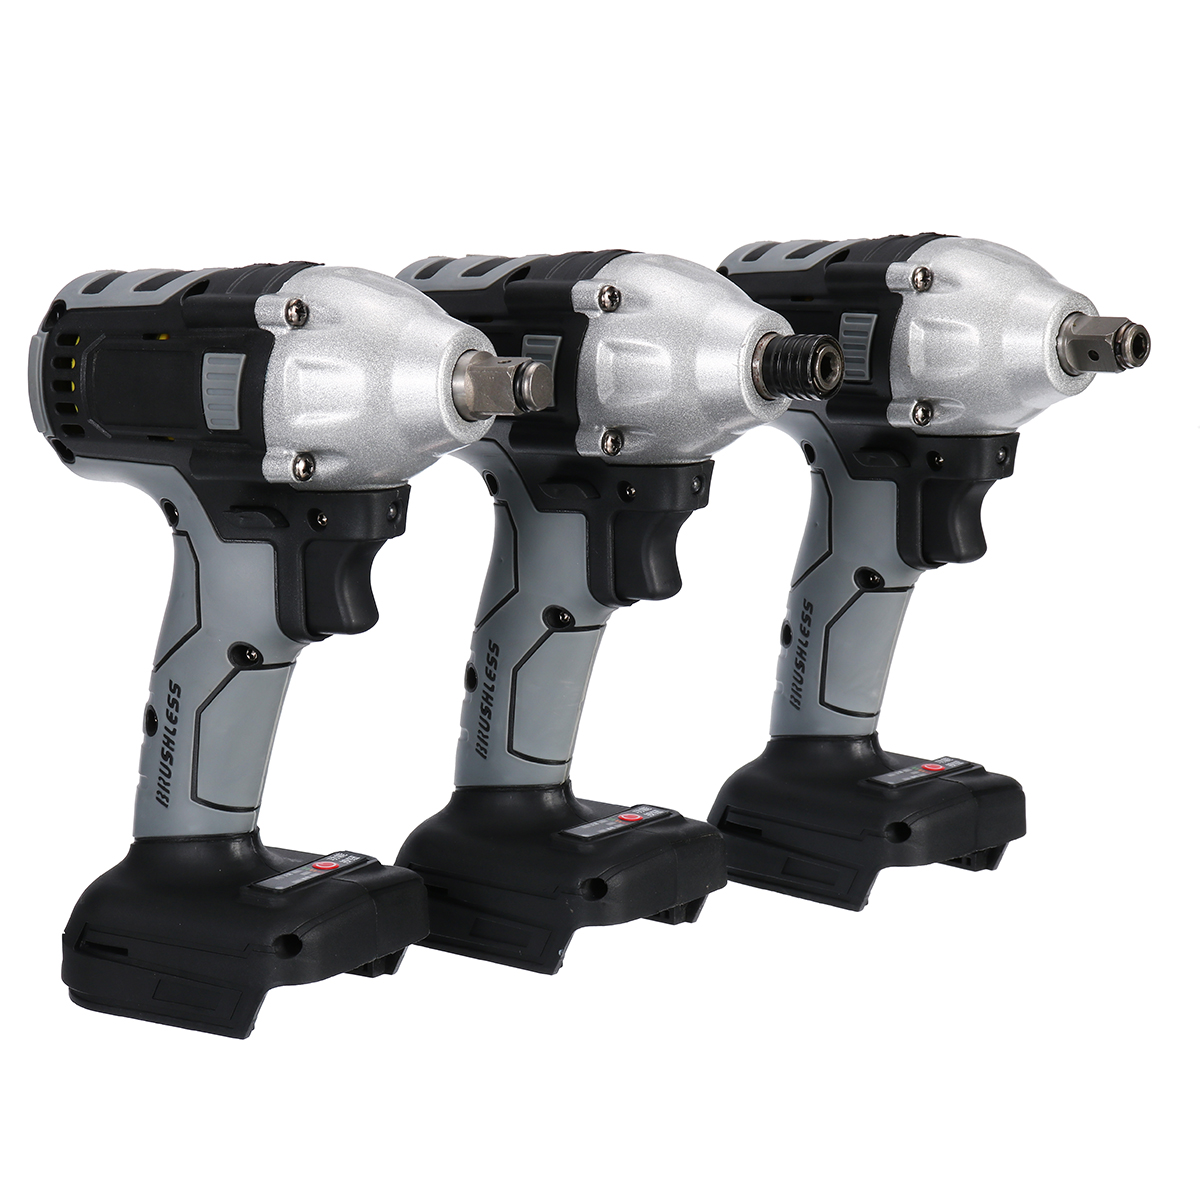 Gray-Cordless-Brushless-Impact-Wrench-Drill-Drive-Machine-For-Makita-18V-Battery-1769332-7